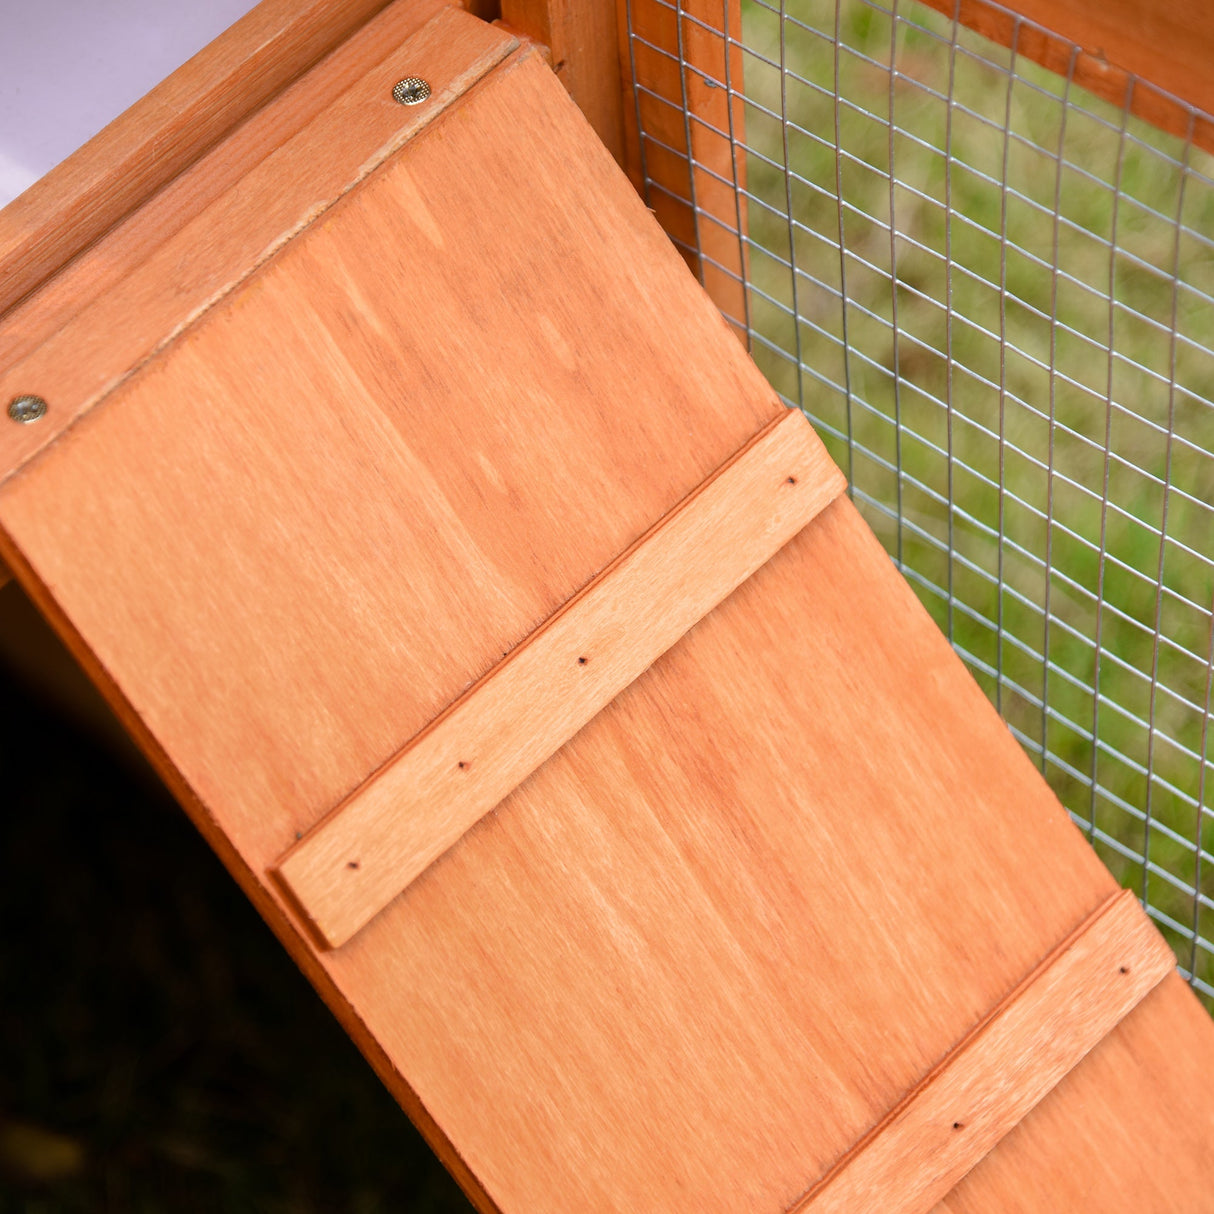 Large Rabbit Hutch Outdoor, Guinea Pig Hutch, Wooden Small Animal House, with Rabbit Run, 215 x 63 x 100 cm, PawHut,